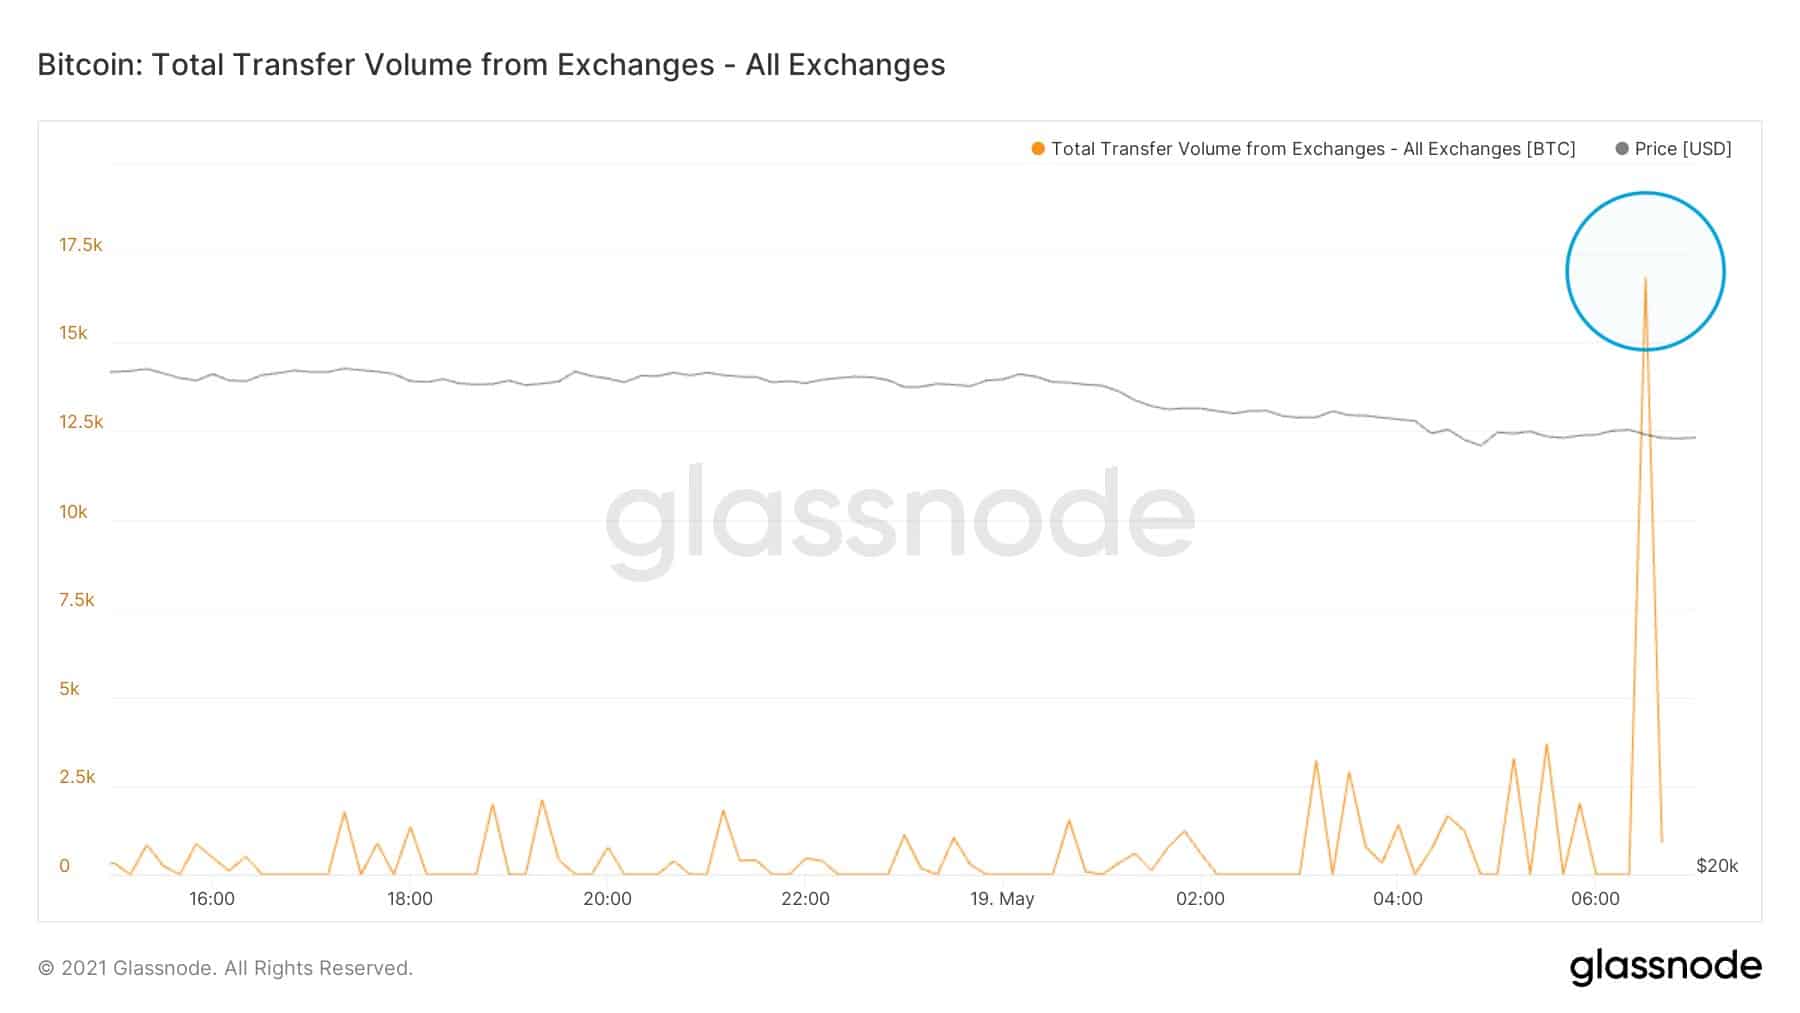 Bitcoin Withdrawals From Exchanges. Source: Glassnode